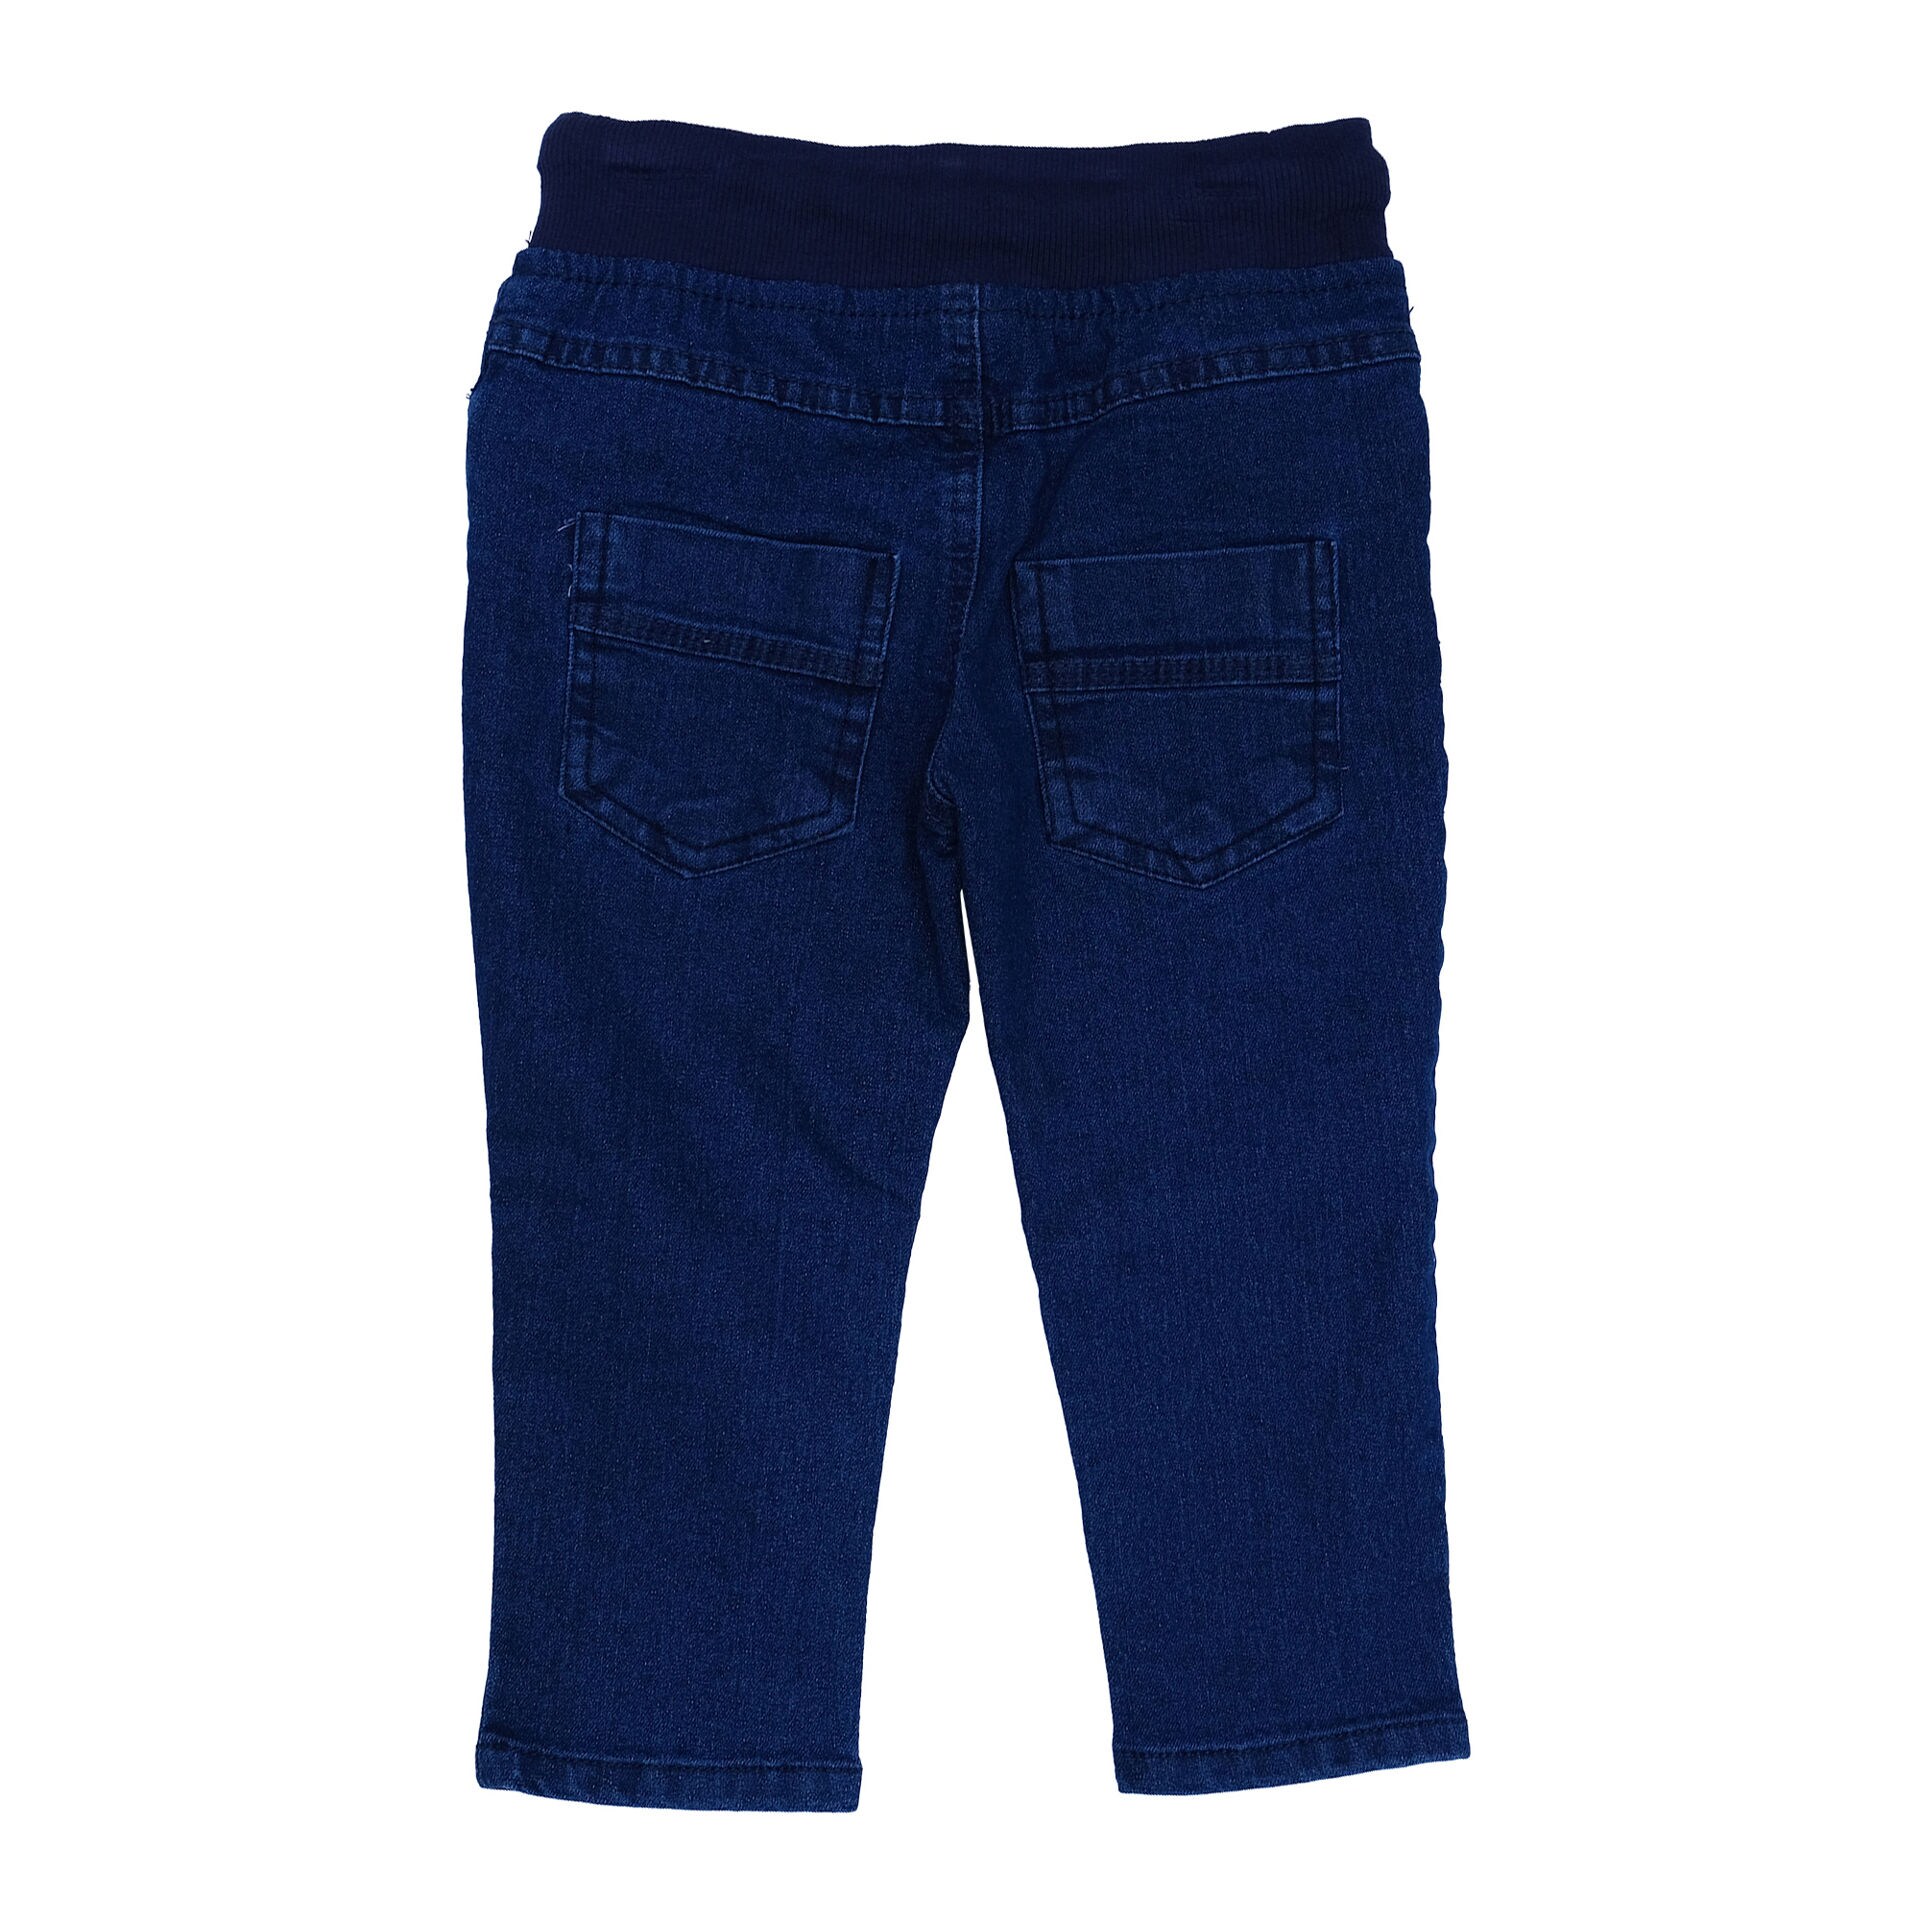 Shop Cool & Classy Full Jeans with Scratch Design Dark Navy Blue ...